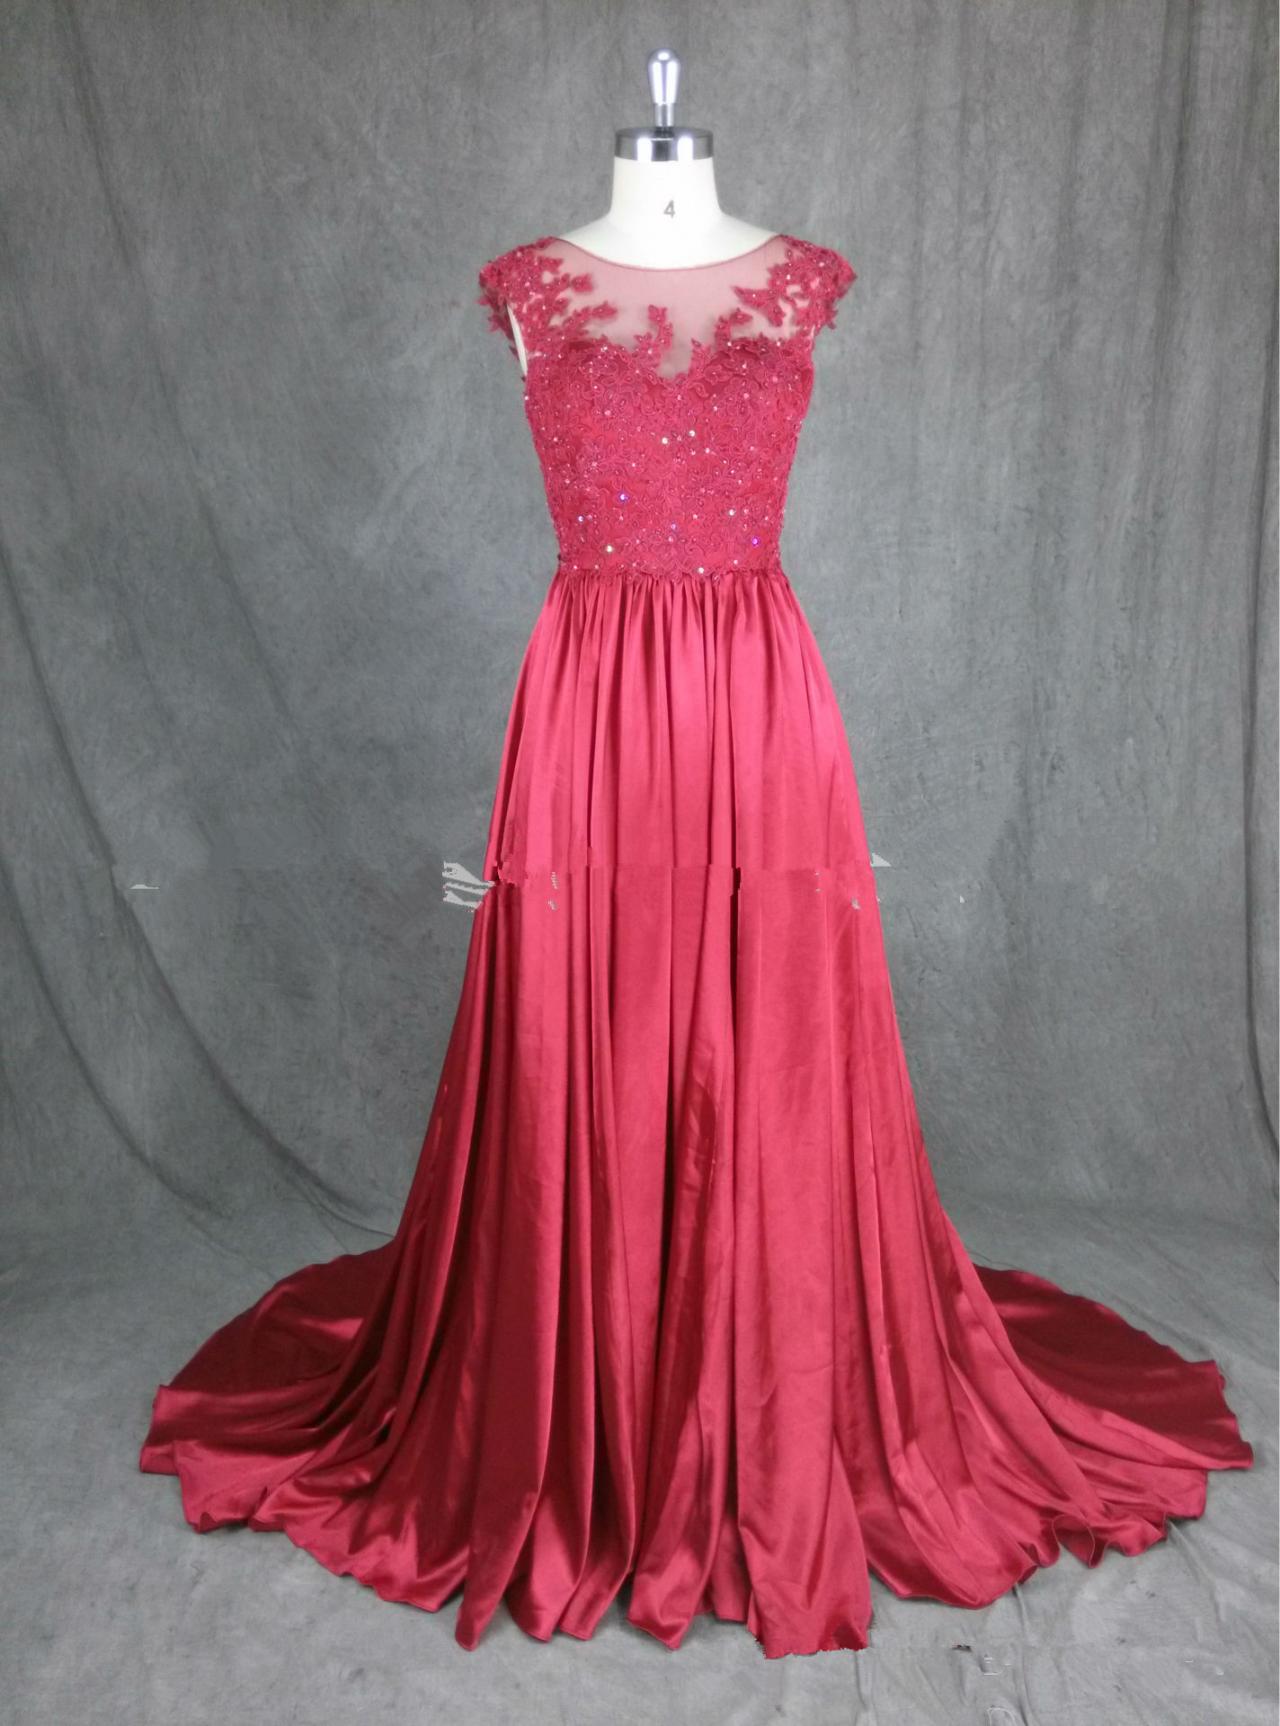 High Quality Handmade Roun Neckline Court Train Burgundy Prom Dress With Lace Tops, Prom Gown, Burgundy Occasion Dresses, Prom 2015